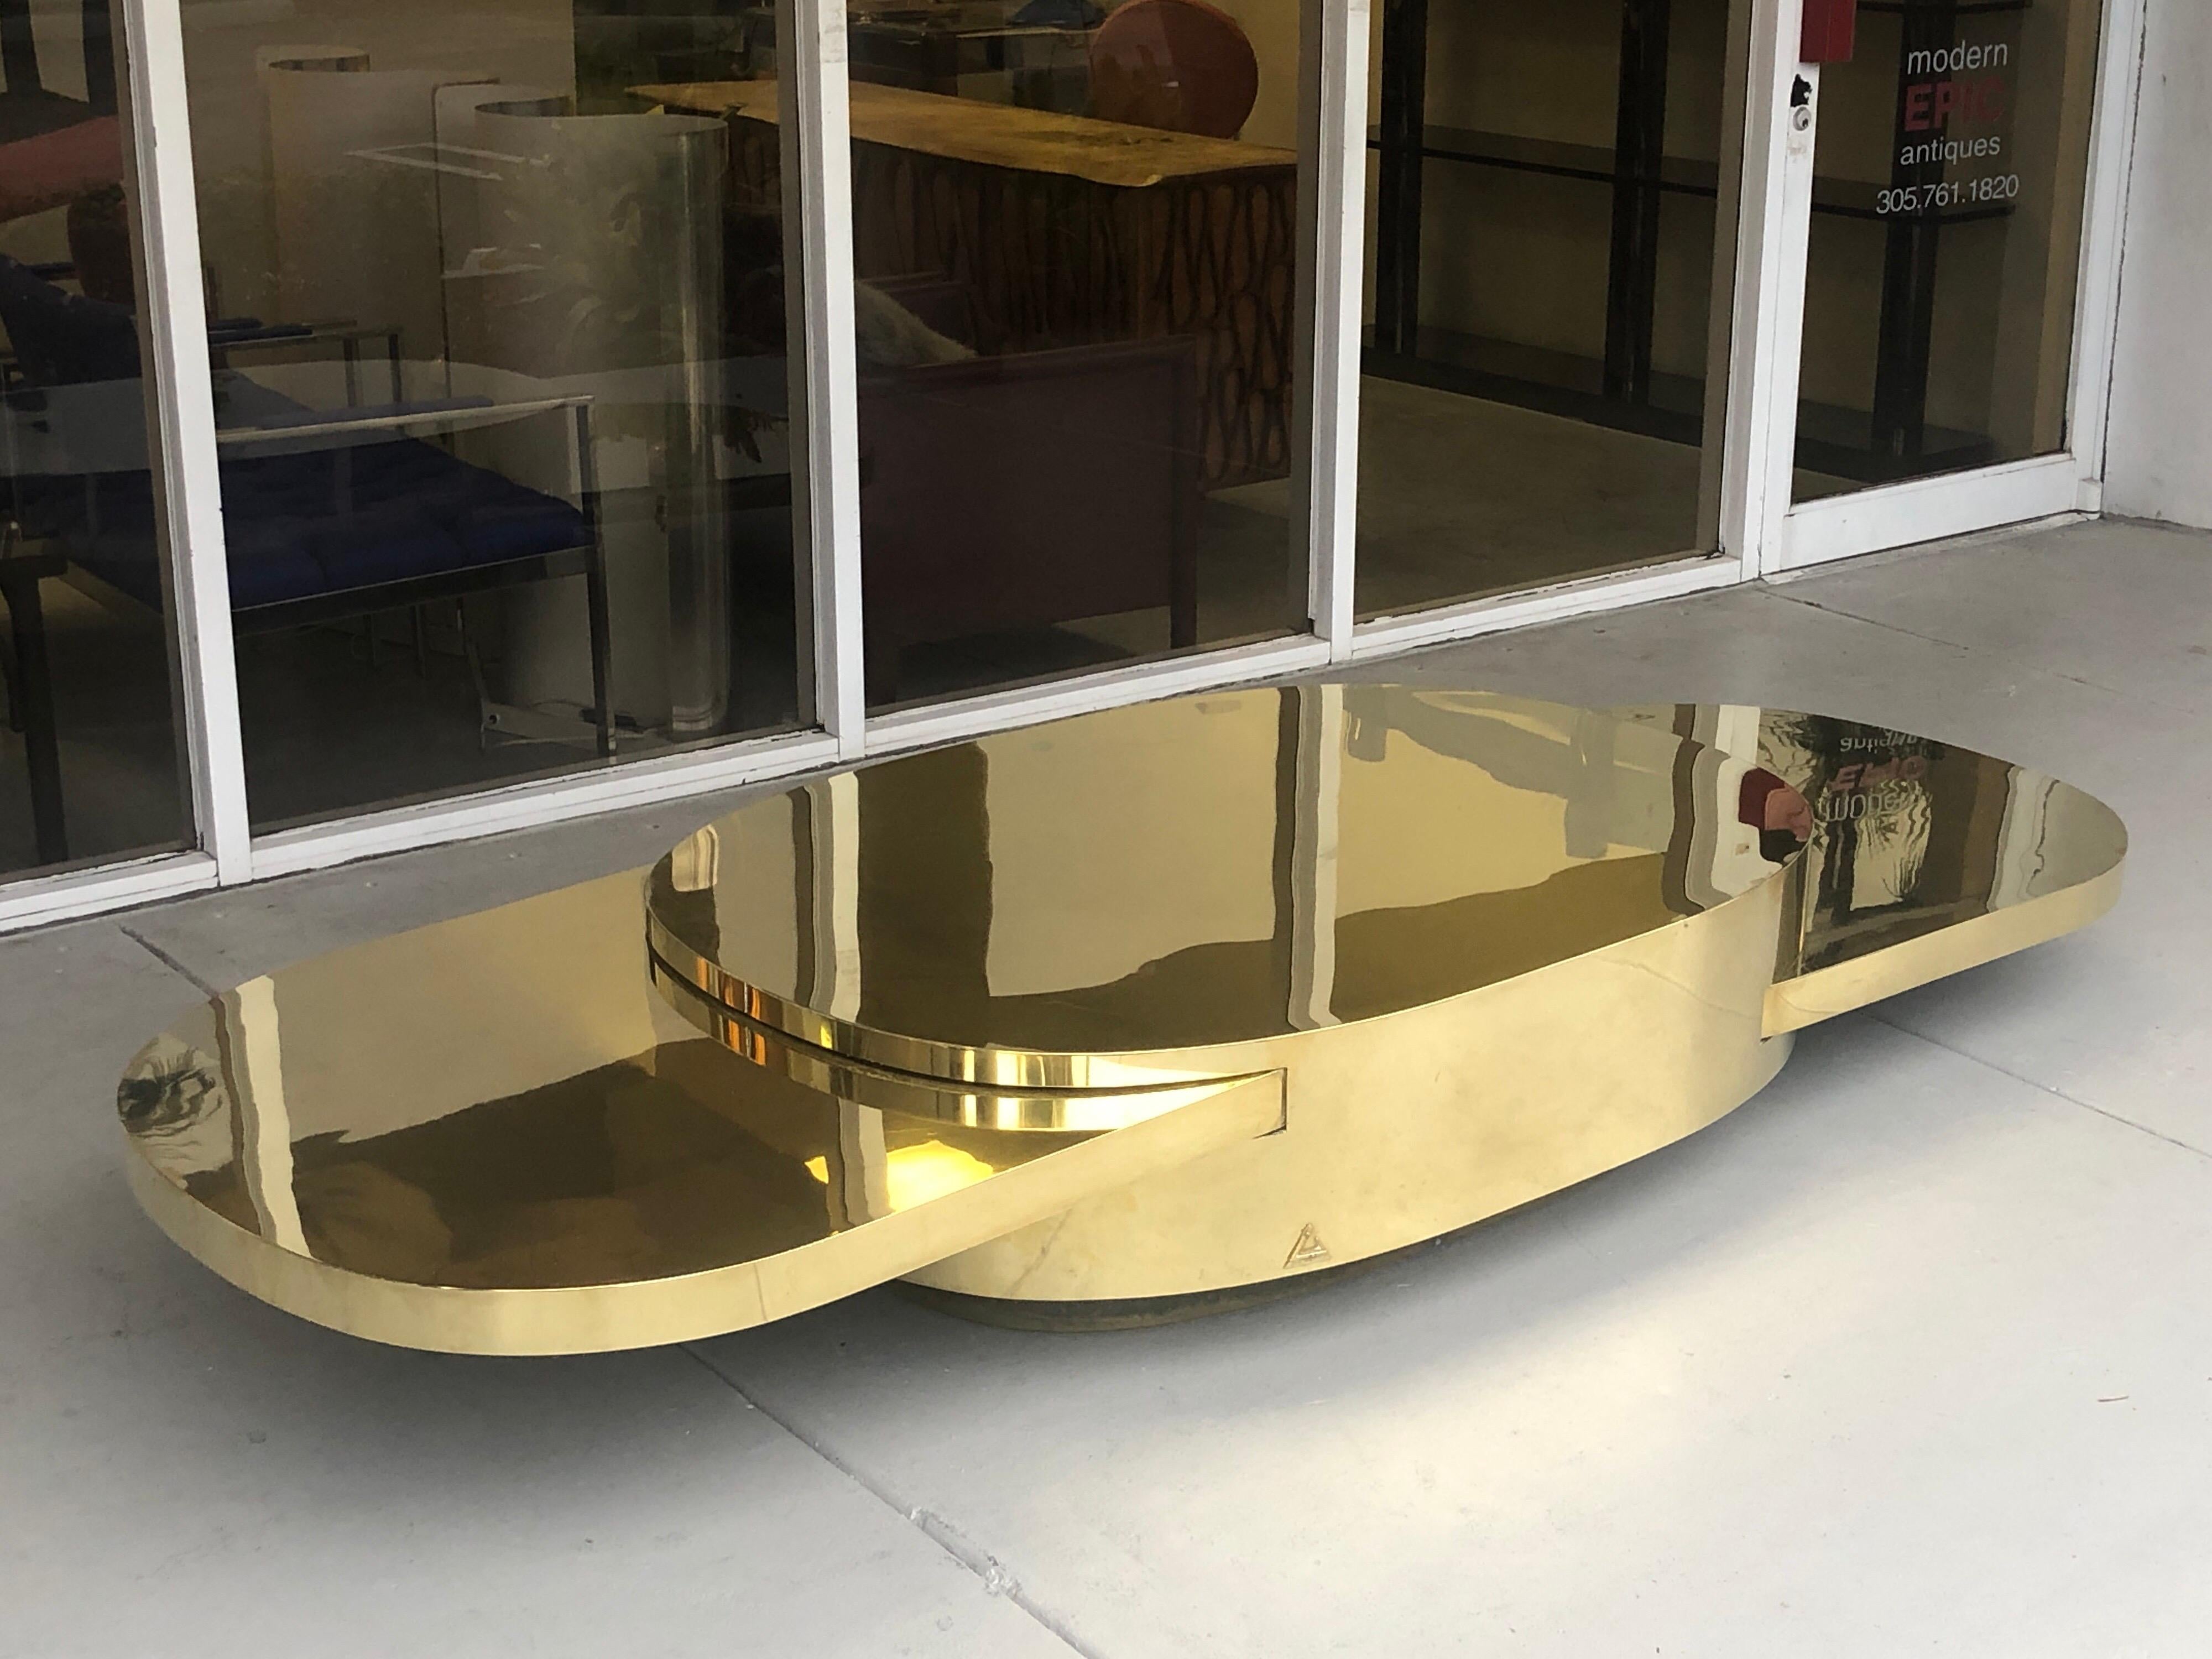 An Ellisse brass coffee table by Gabriella Cespi. From her celebrated and iconic Plurimi series. Oval brass shape with 2 retractable elliptical tops in brass as well. Extends from 51